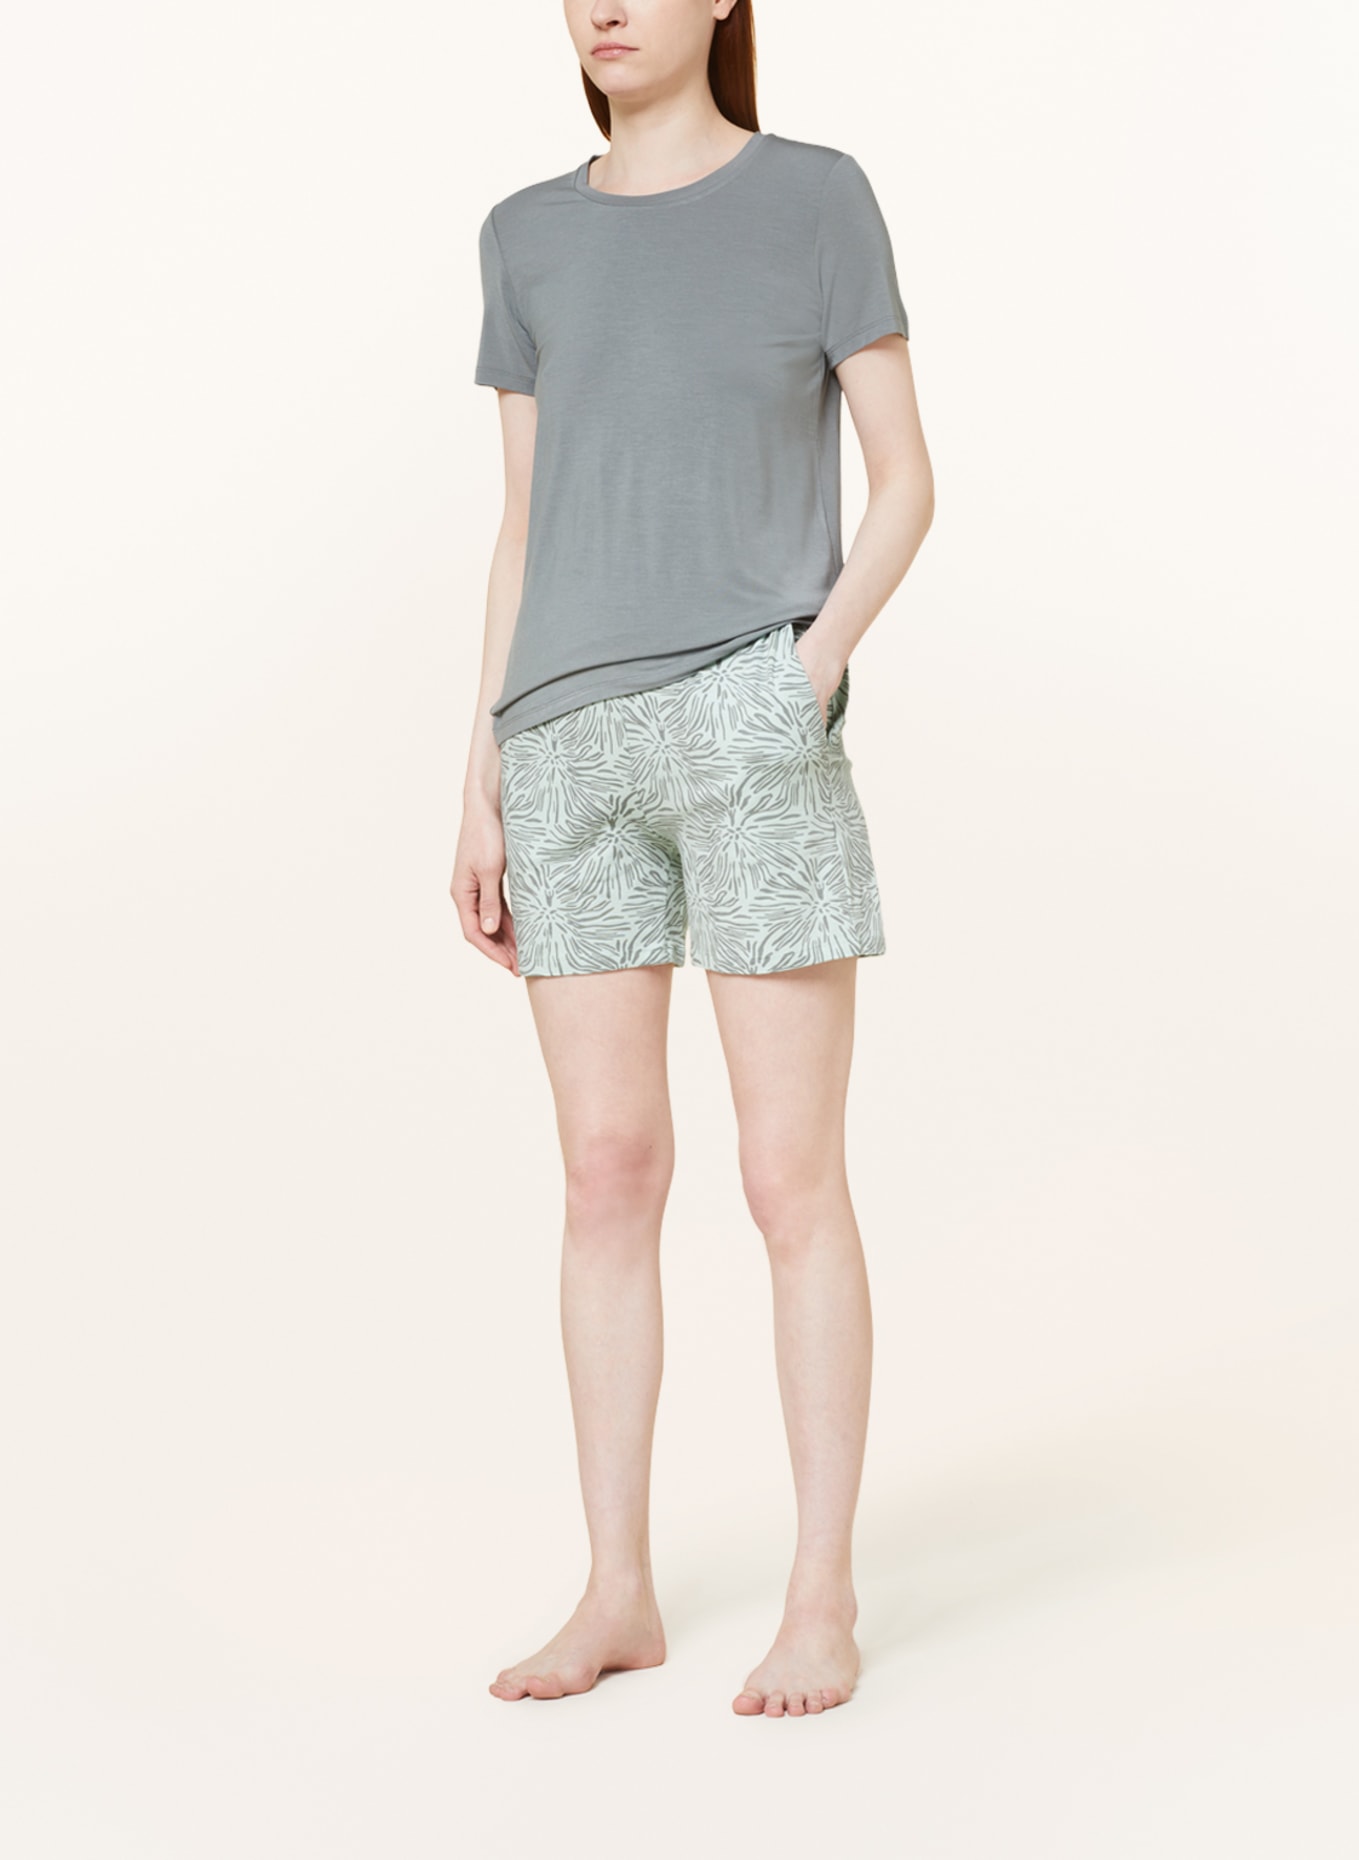 SCHIESSER Pajama shorts MIX+RELAX, Color: LIGHT GREEN/ GRAY (Image 2)